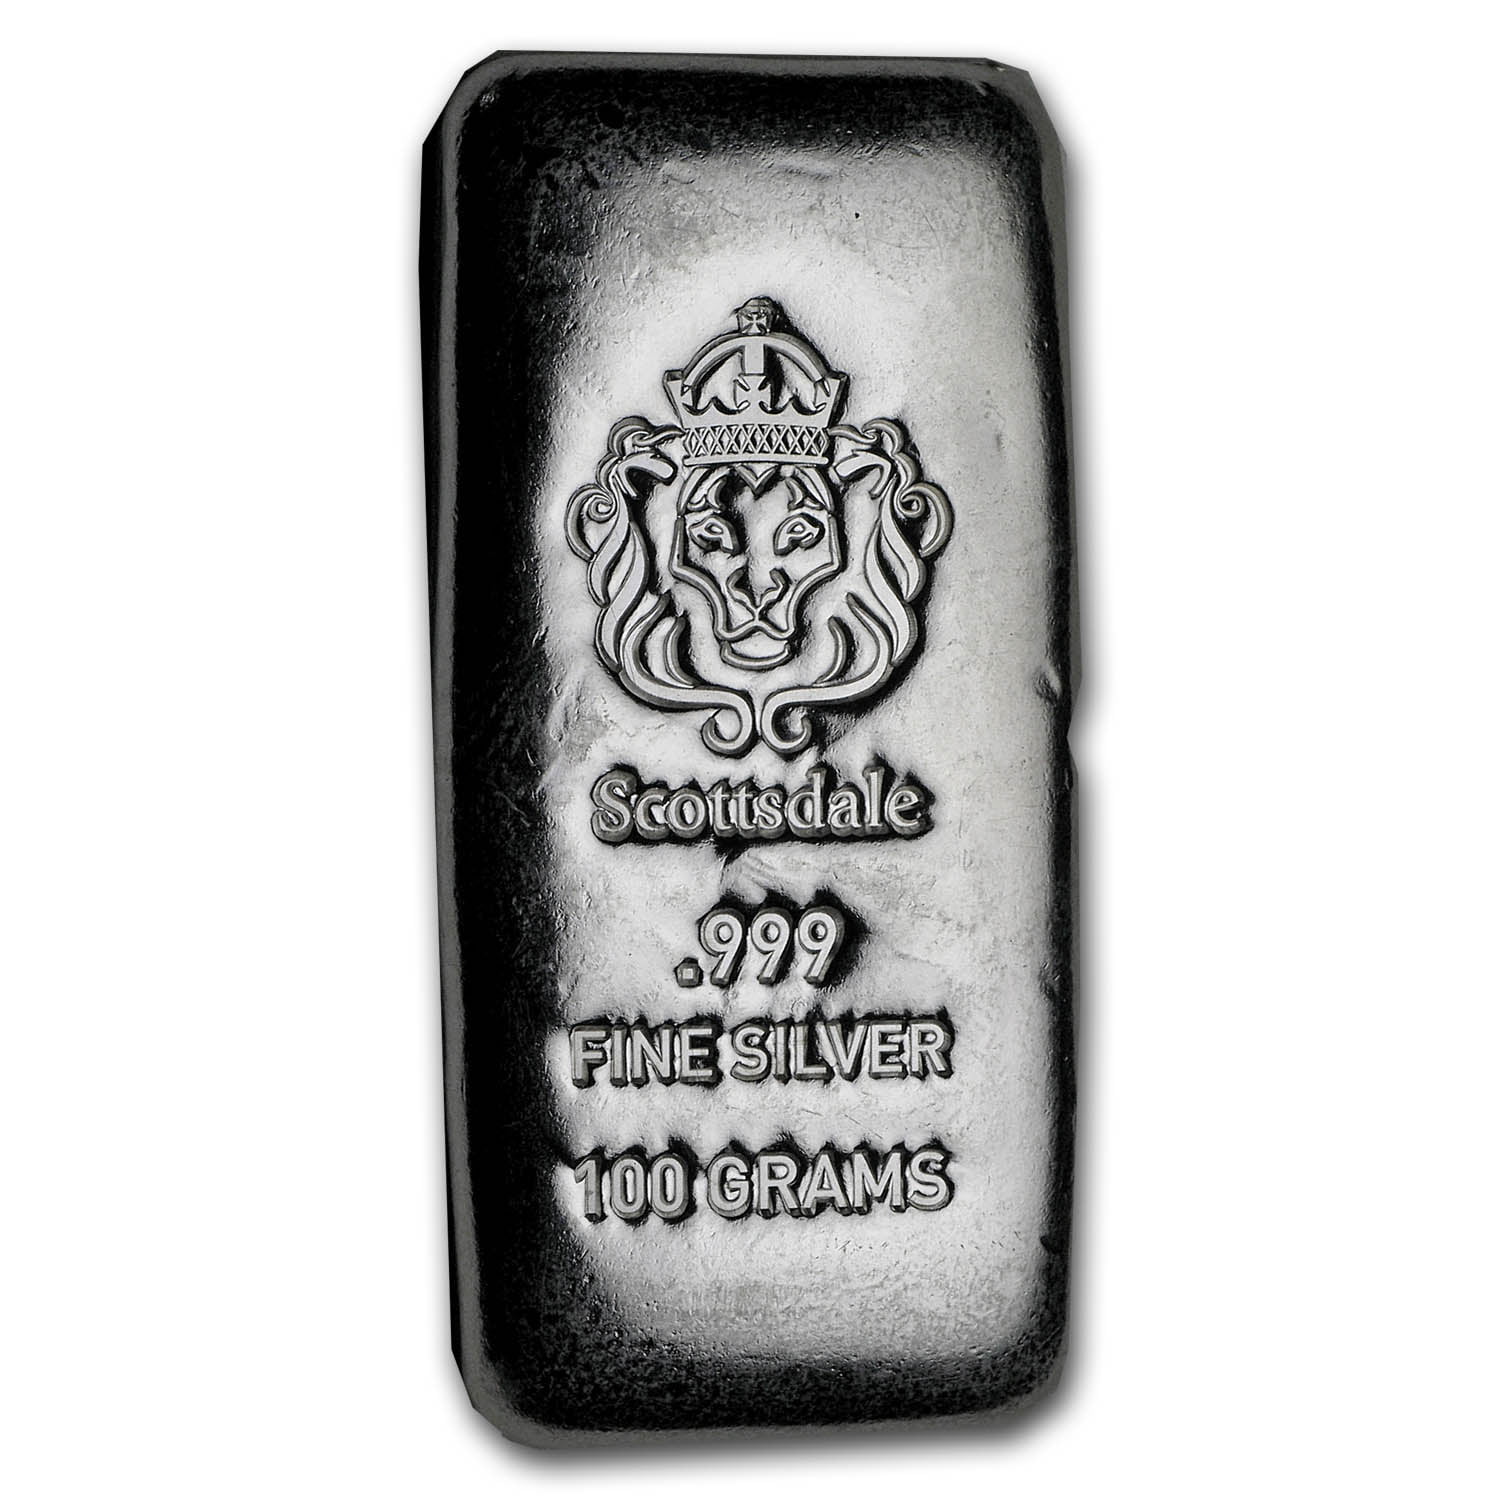 100 Grams SilverPoured Silver Shot.999Volume Pricing 